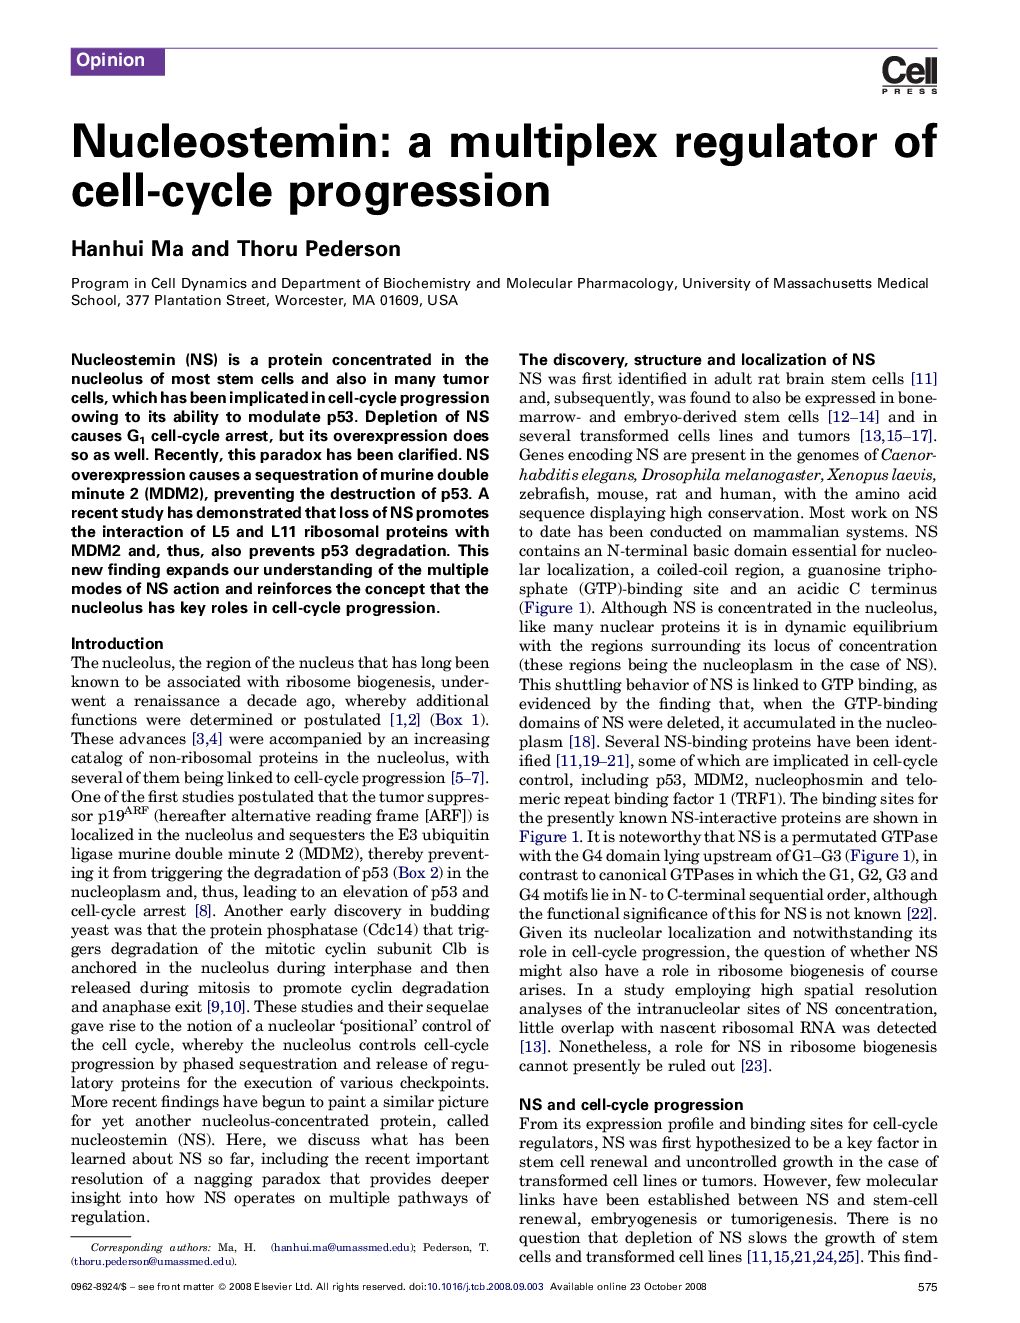 Nucleostemin: a multiplex regulator of cell-cycle progression